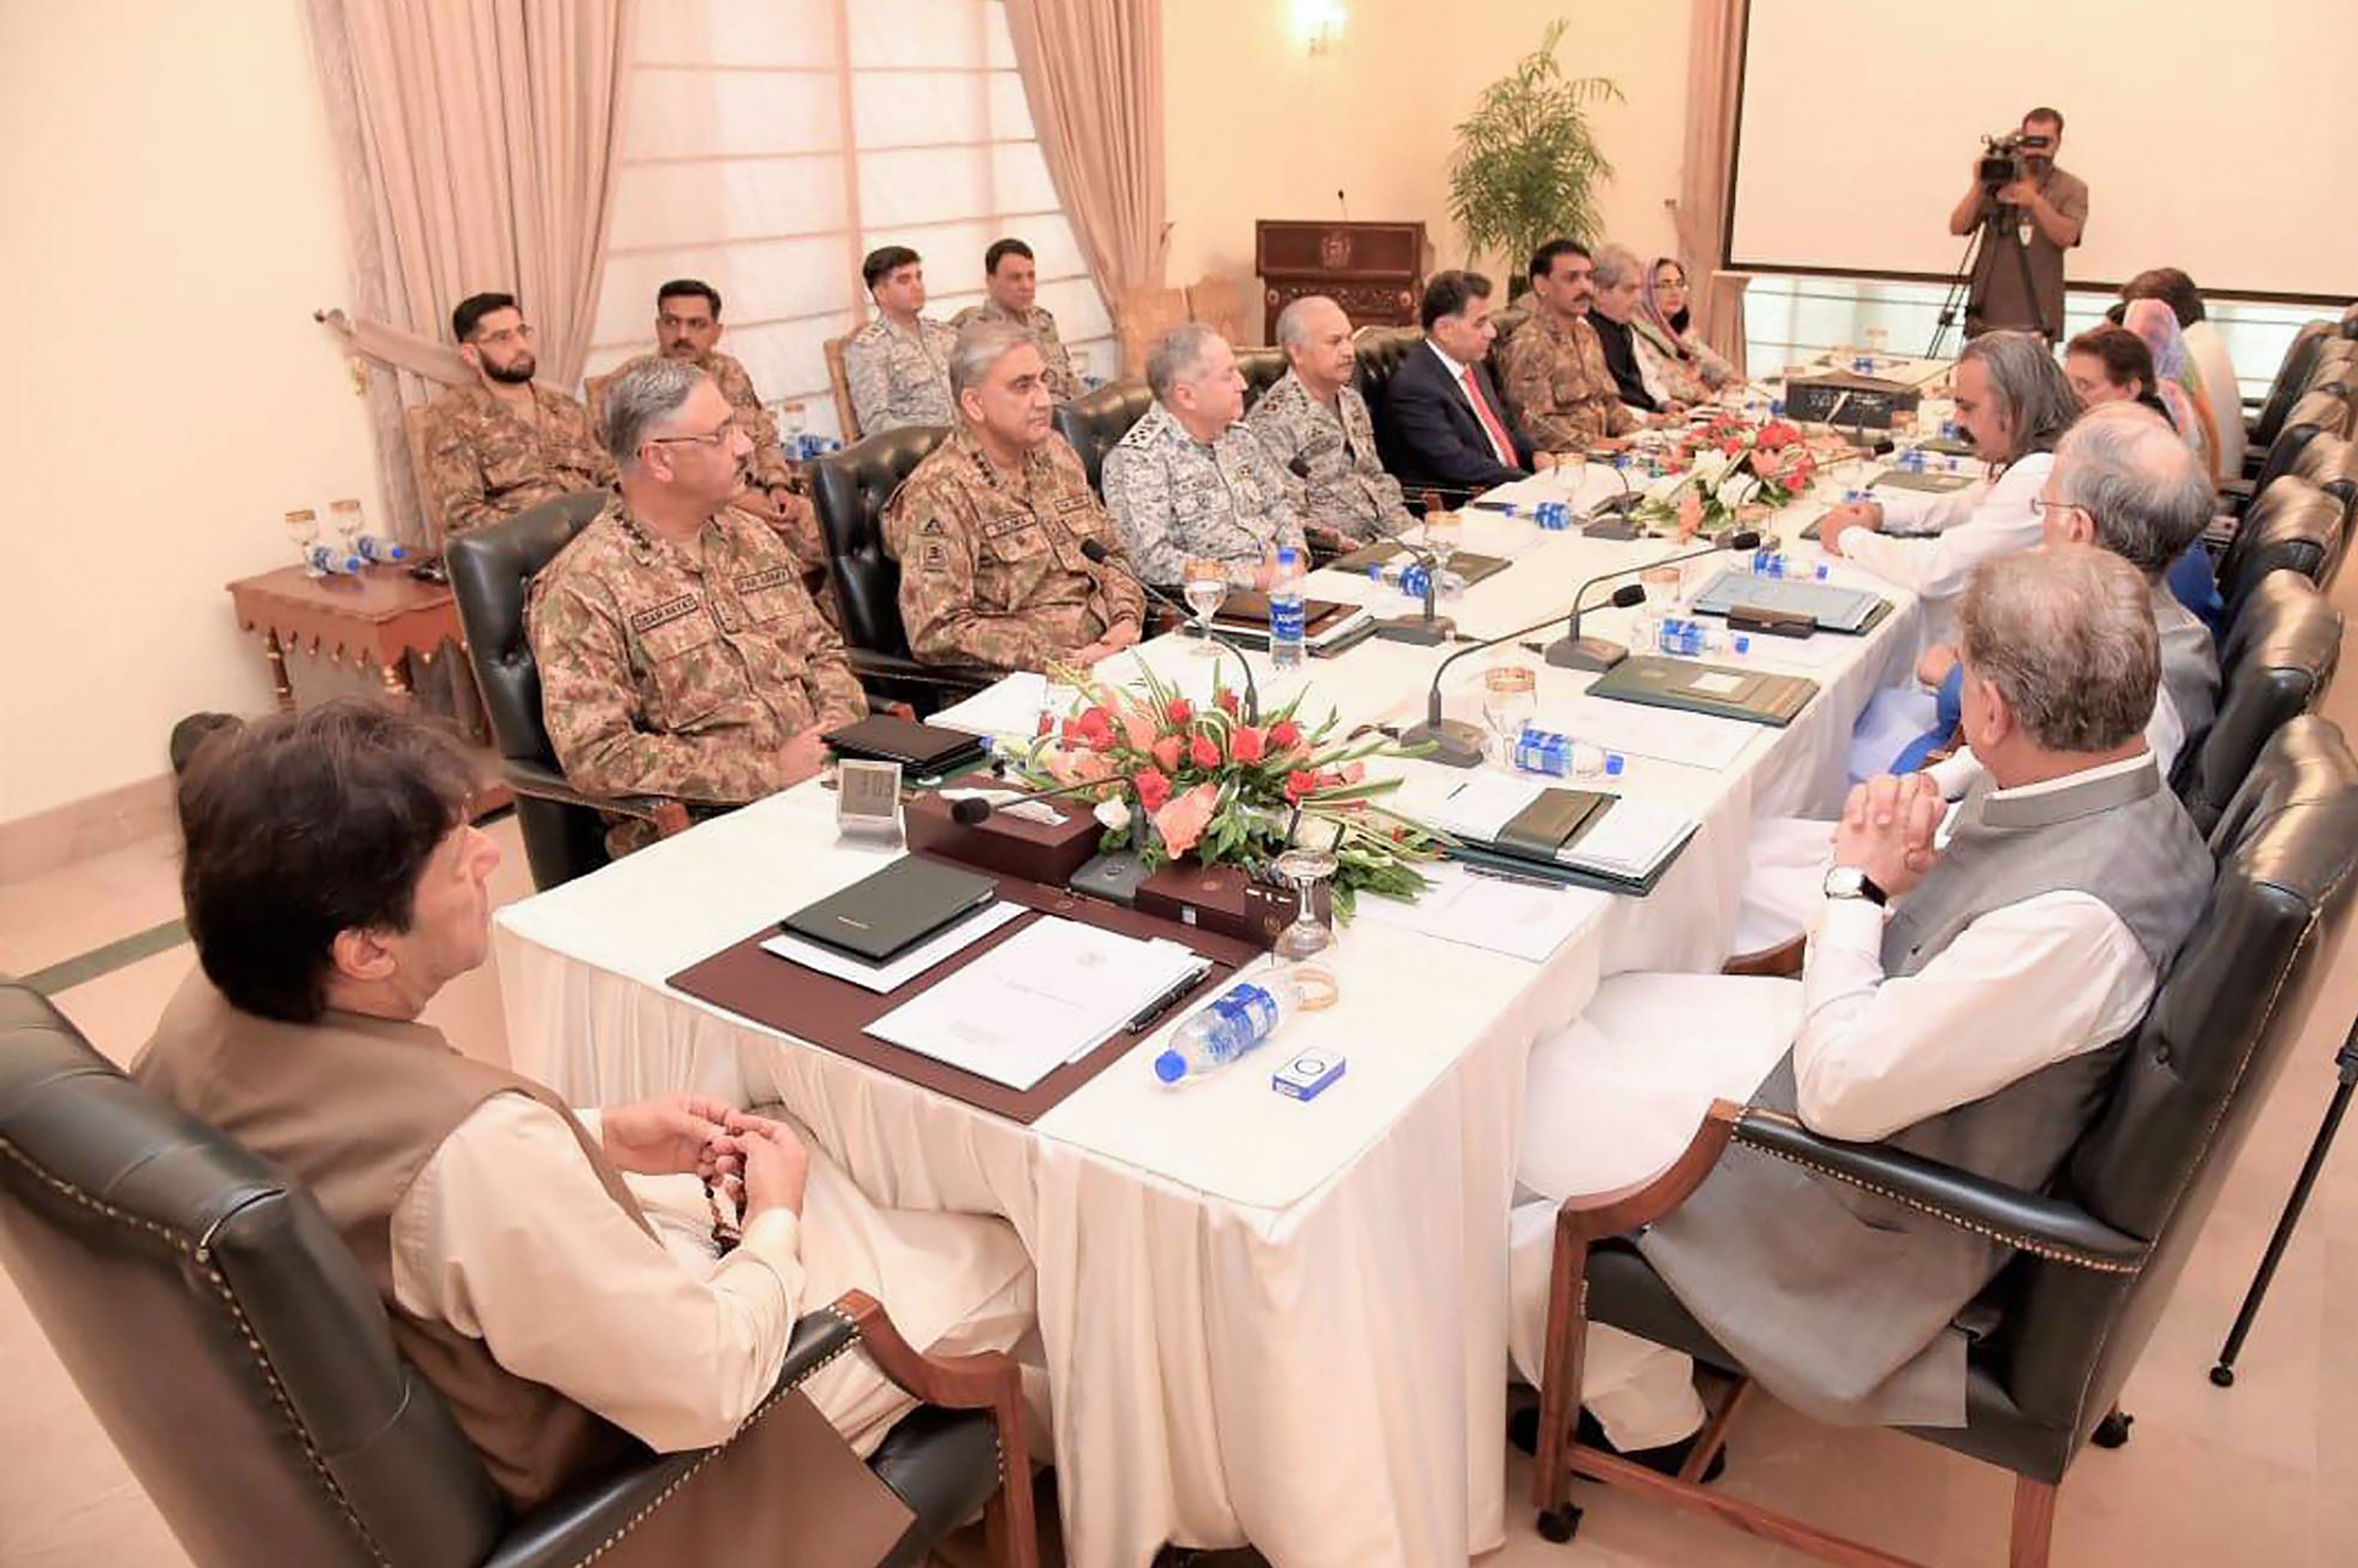  Pakistan Prime Minister Imran Khan (L) chairs the National Security Committee meeting in Islamabad. - Fears of an impending curfew in the disputed region of Kashmir ratcheted up tensions. (AFP Photo)